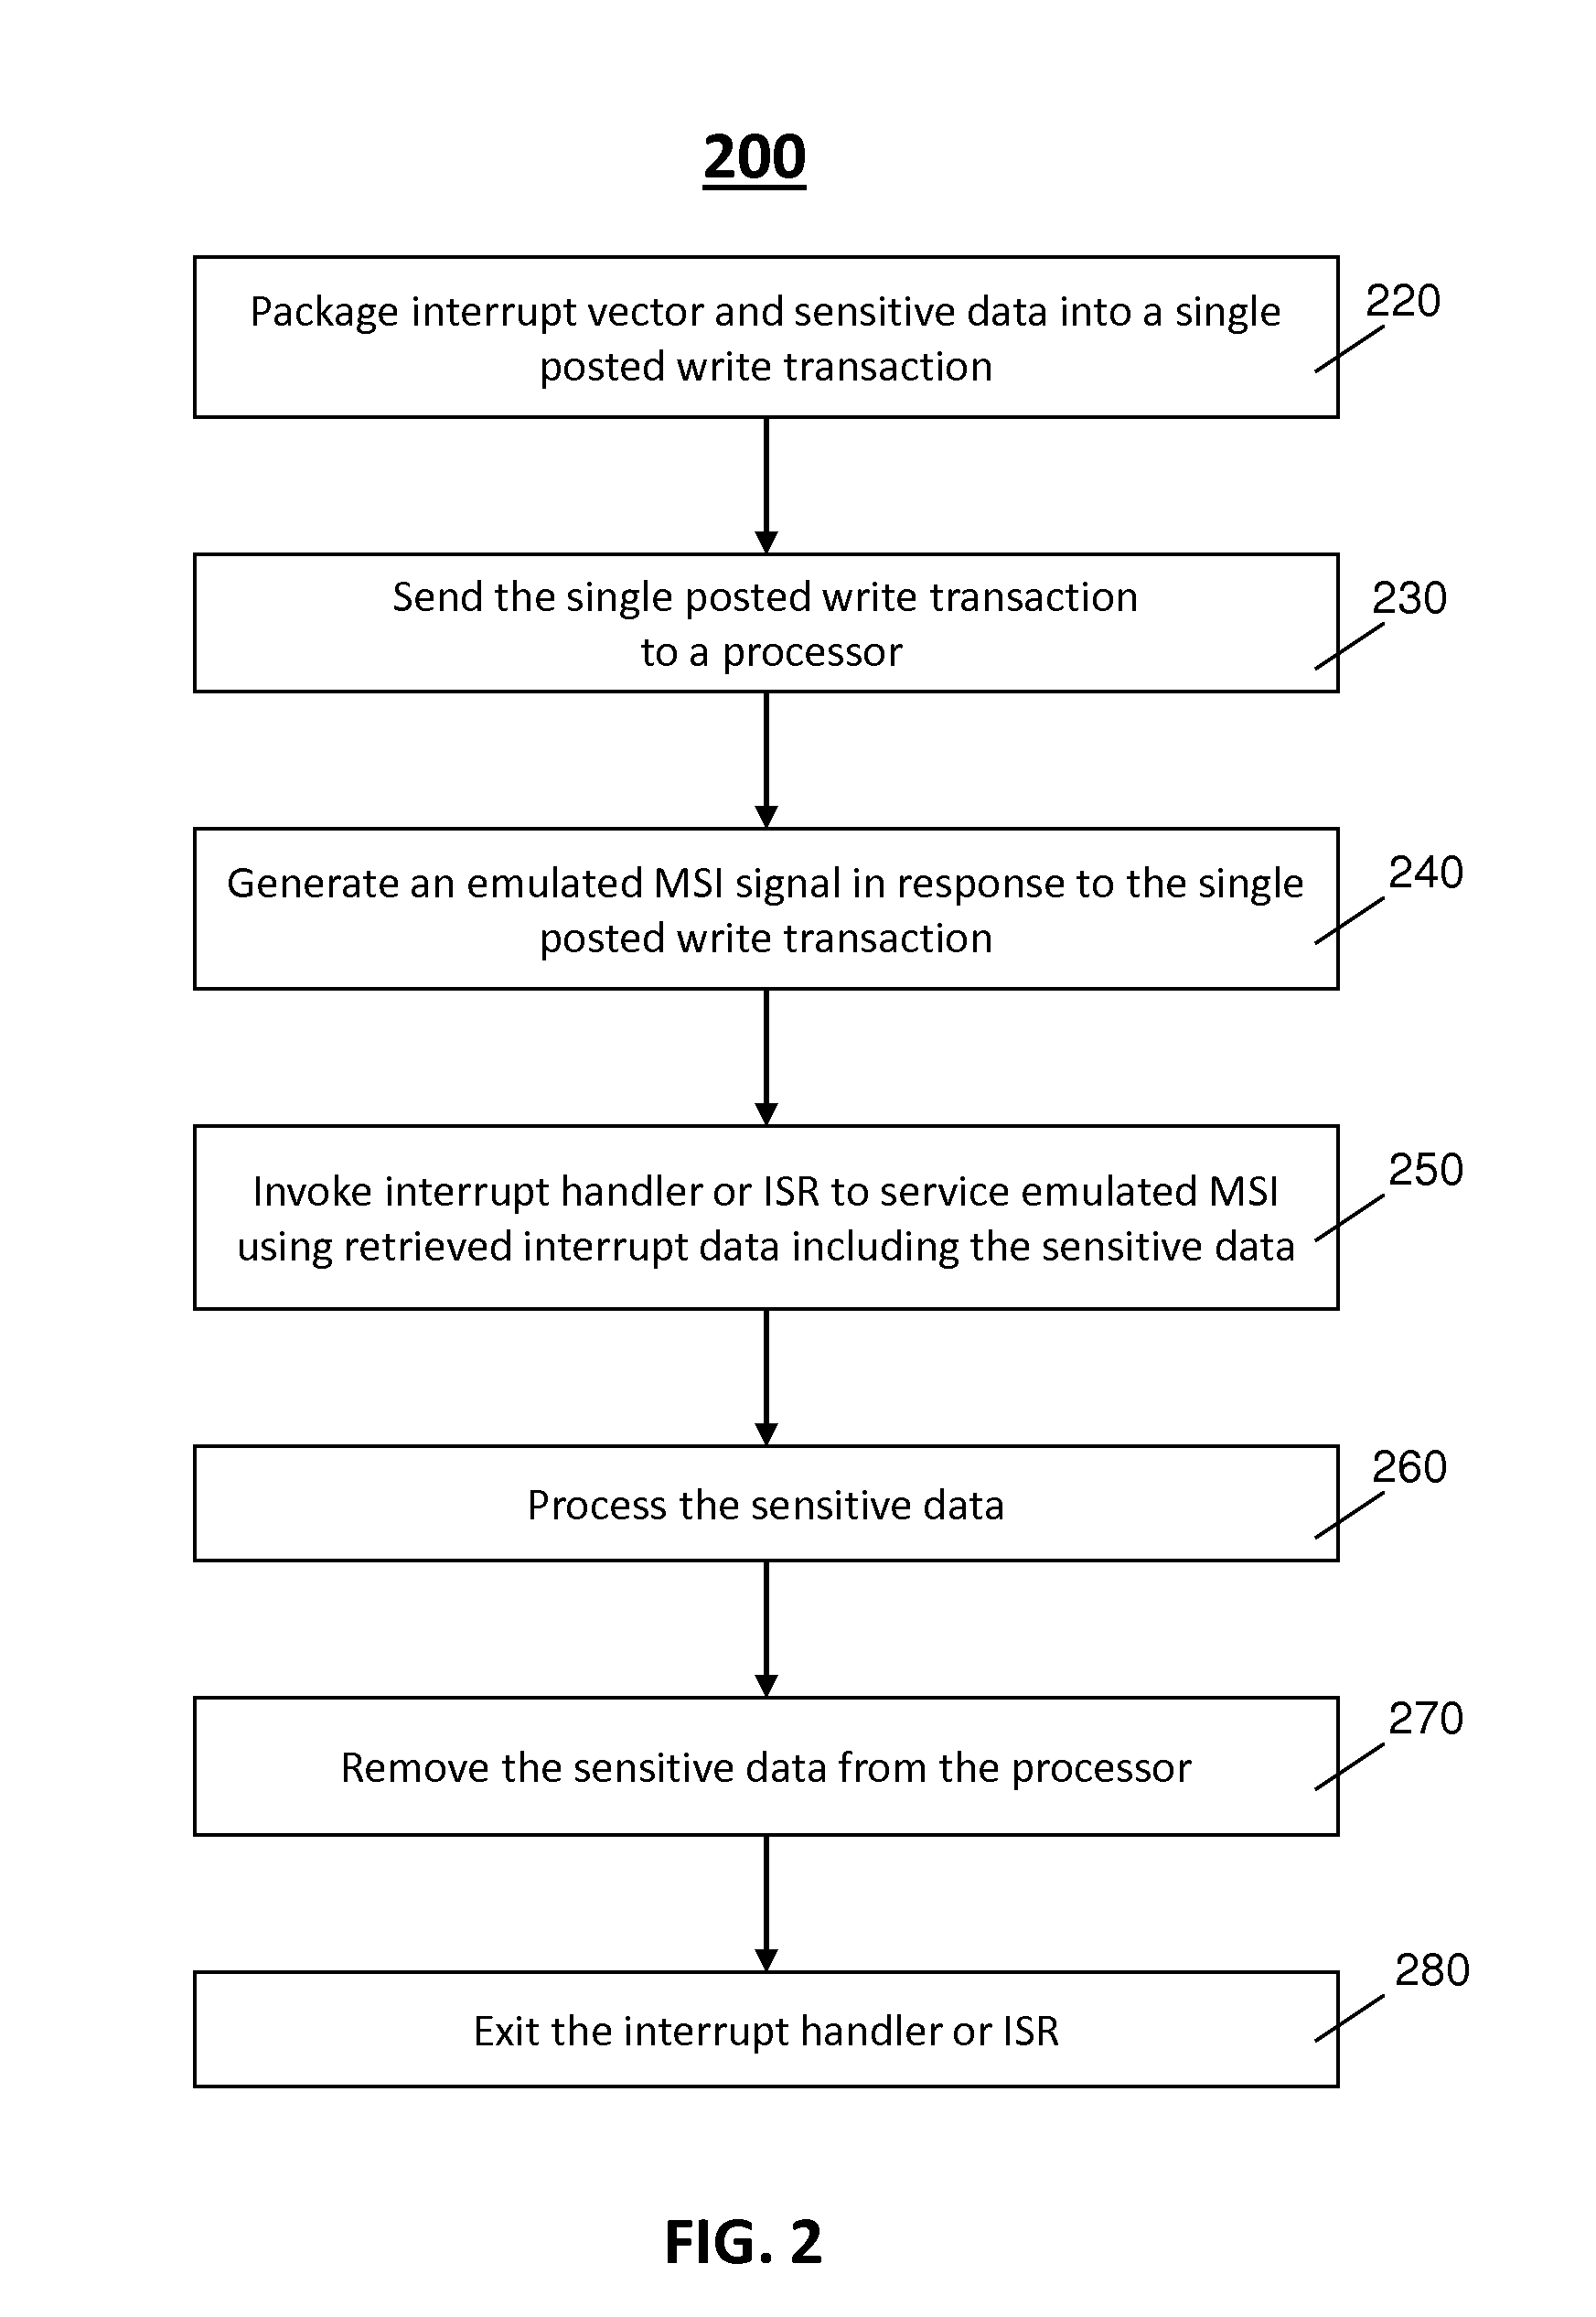 Method for implementing secure data channel between processor and devices